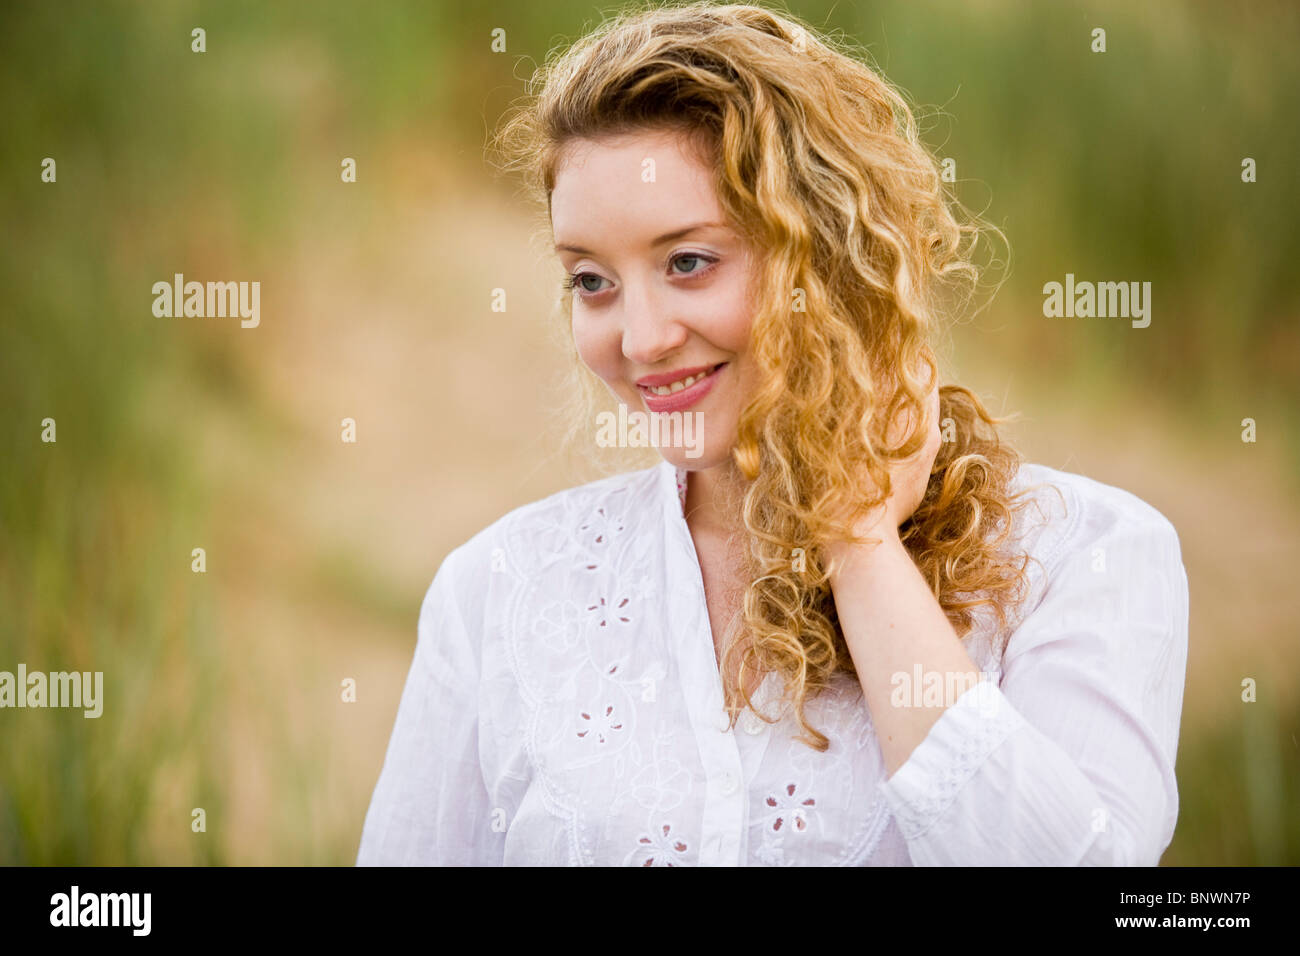 Portrait of attractive woman outdoors Stock Photo